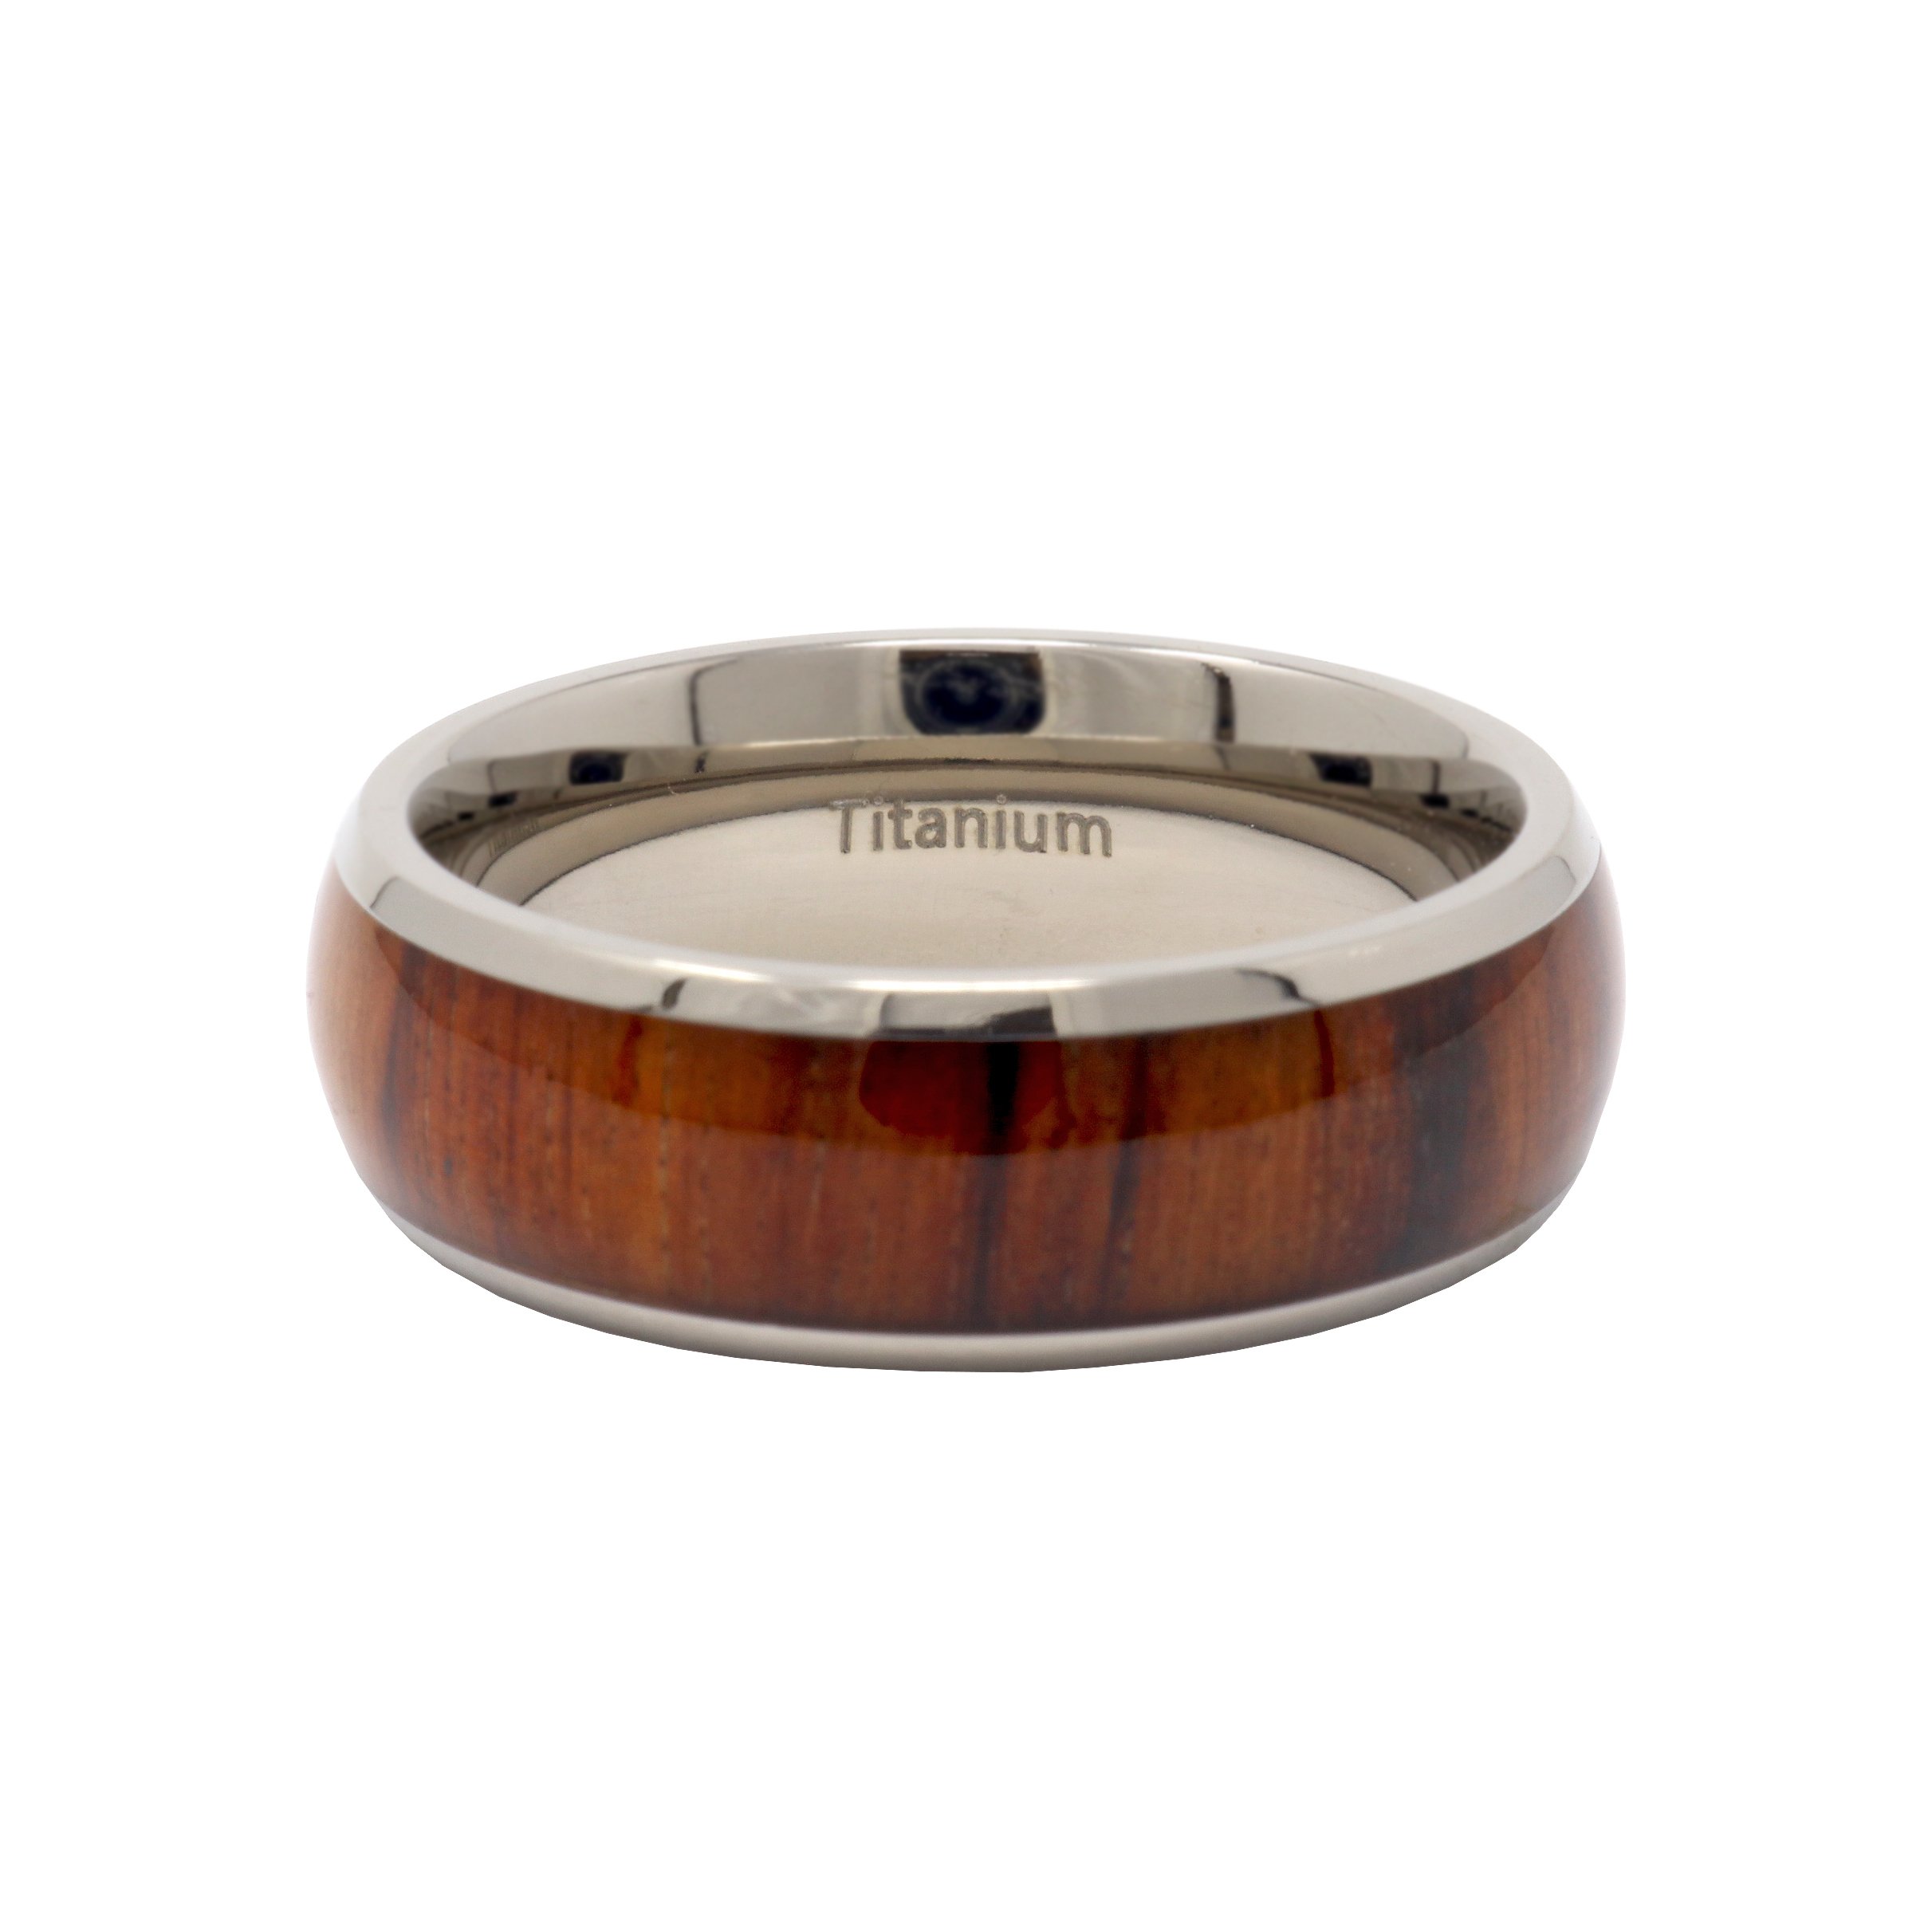 Titanium Ring Size 10 8mm Domed Rosewood Inlay